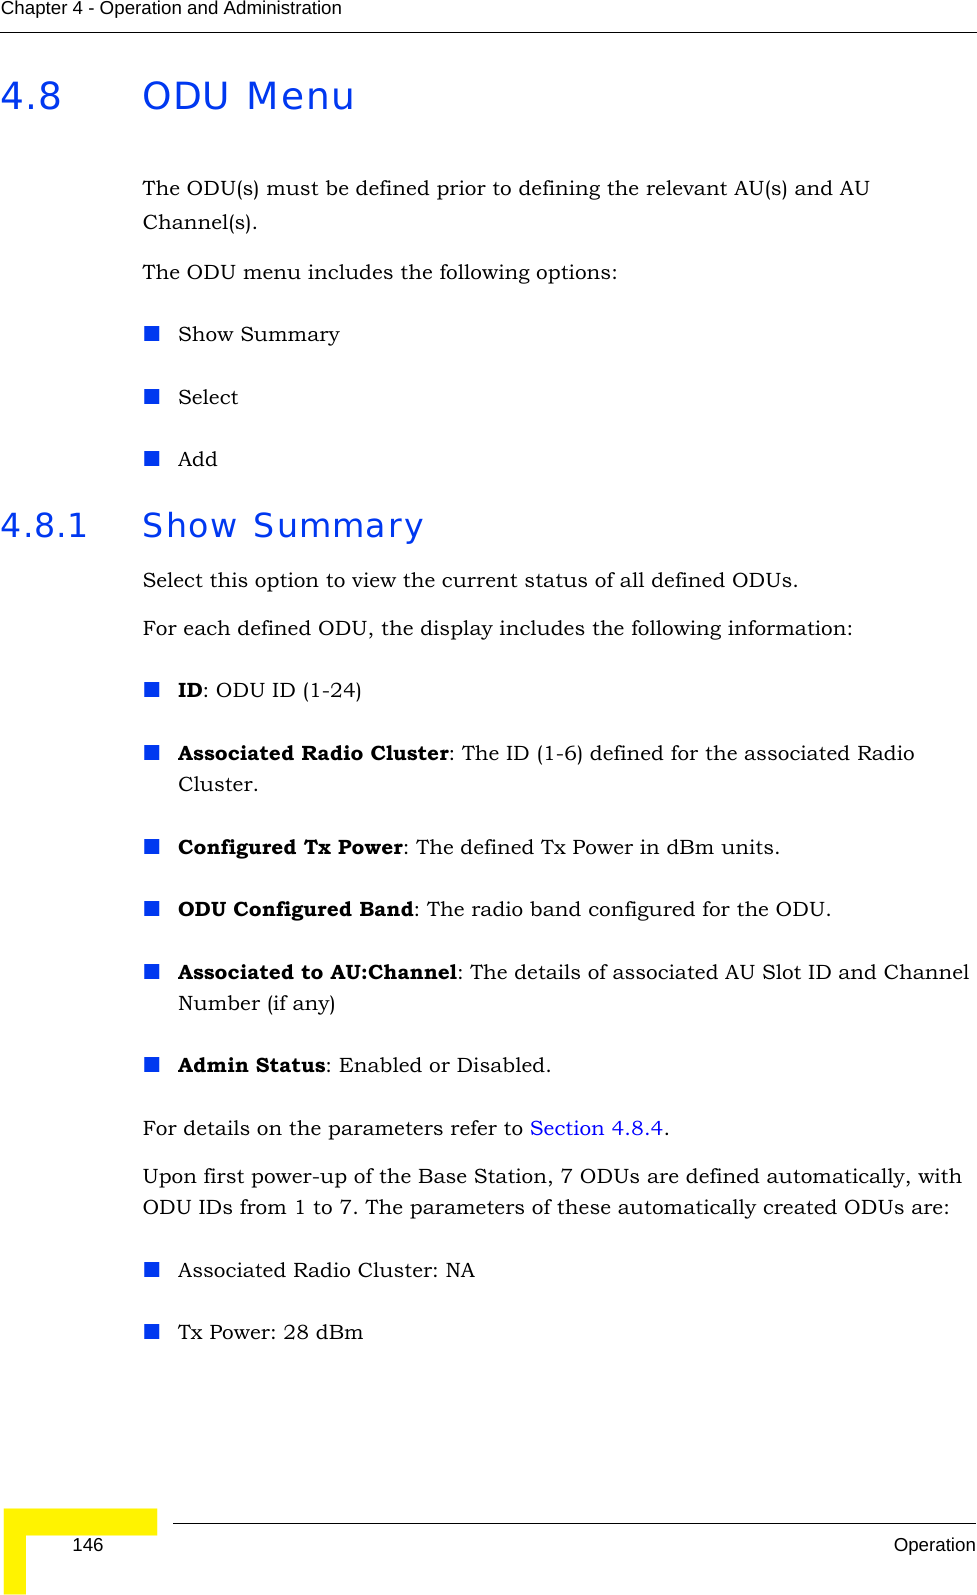  146 OperationChapter 4 - Operation and Administration4.8 ODU MenuThe ODU(s) must be defined prior to defining the relevant AU(s) and AU Channel(s).The ODU menu includes the following options:Show SummarySelectAdd4.8.1 Show SummarySelect this option to view the current status of all defined ODUs. For each defined ODU, the display includes the following information:ID: ODU ID (1-24)Associated Radio Cluster: The ID (1-6) defined for the associated Radio Cluster. Configured Tx Power: The defined Tx Power in dBm units.ODU Configured Band: The radio band configured for the ODU.Associated to AU:Channel: The details of associated AU Slot ID and Channel Number (if any)Admin Status: Enabled or Disabled.For details on the parameters refer to Section 4.8.4.Upon first power-up of the Base Station, 7 ODUs are defined automatically, with ODU IDs from 1 to 7. The parameters of these automatically created ODUs are:Associated Radio Cluster: NATx Power: 28 dBm